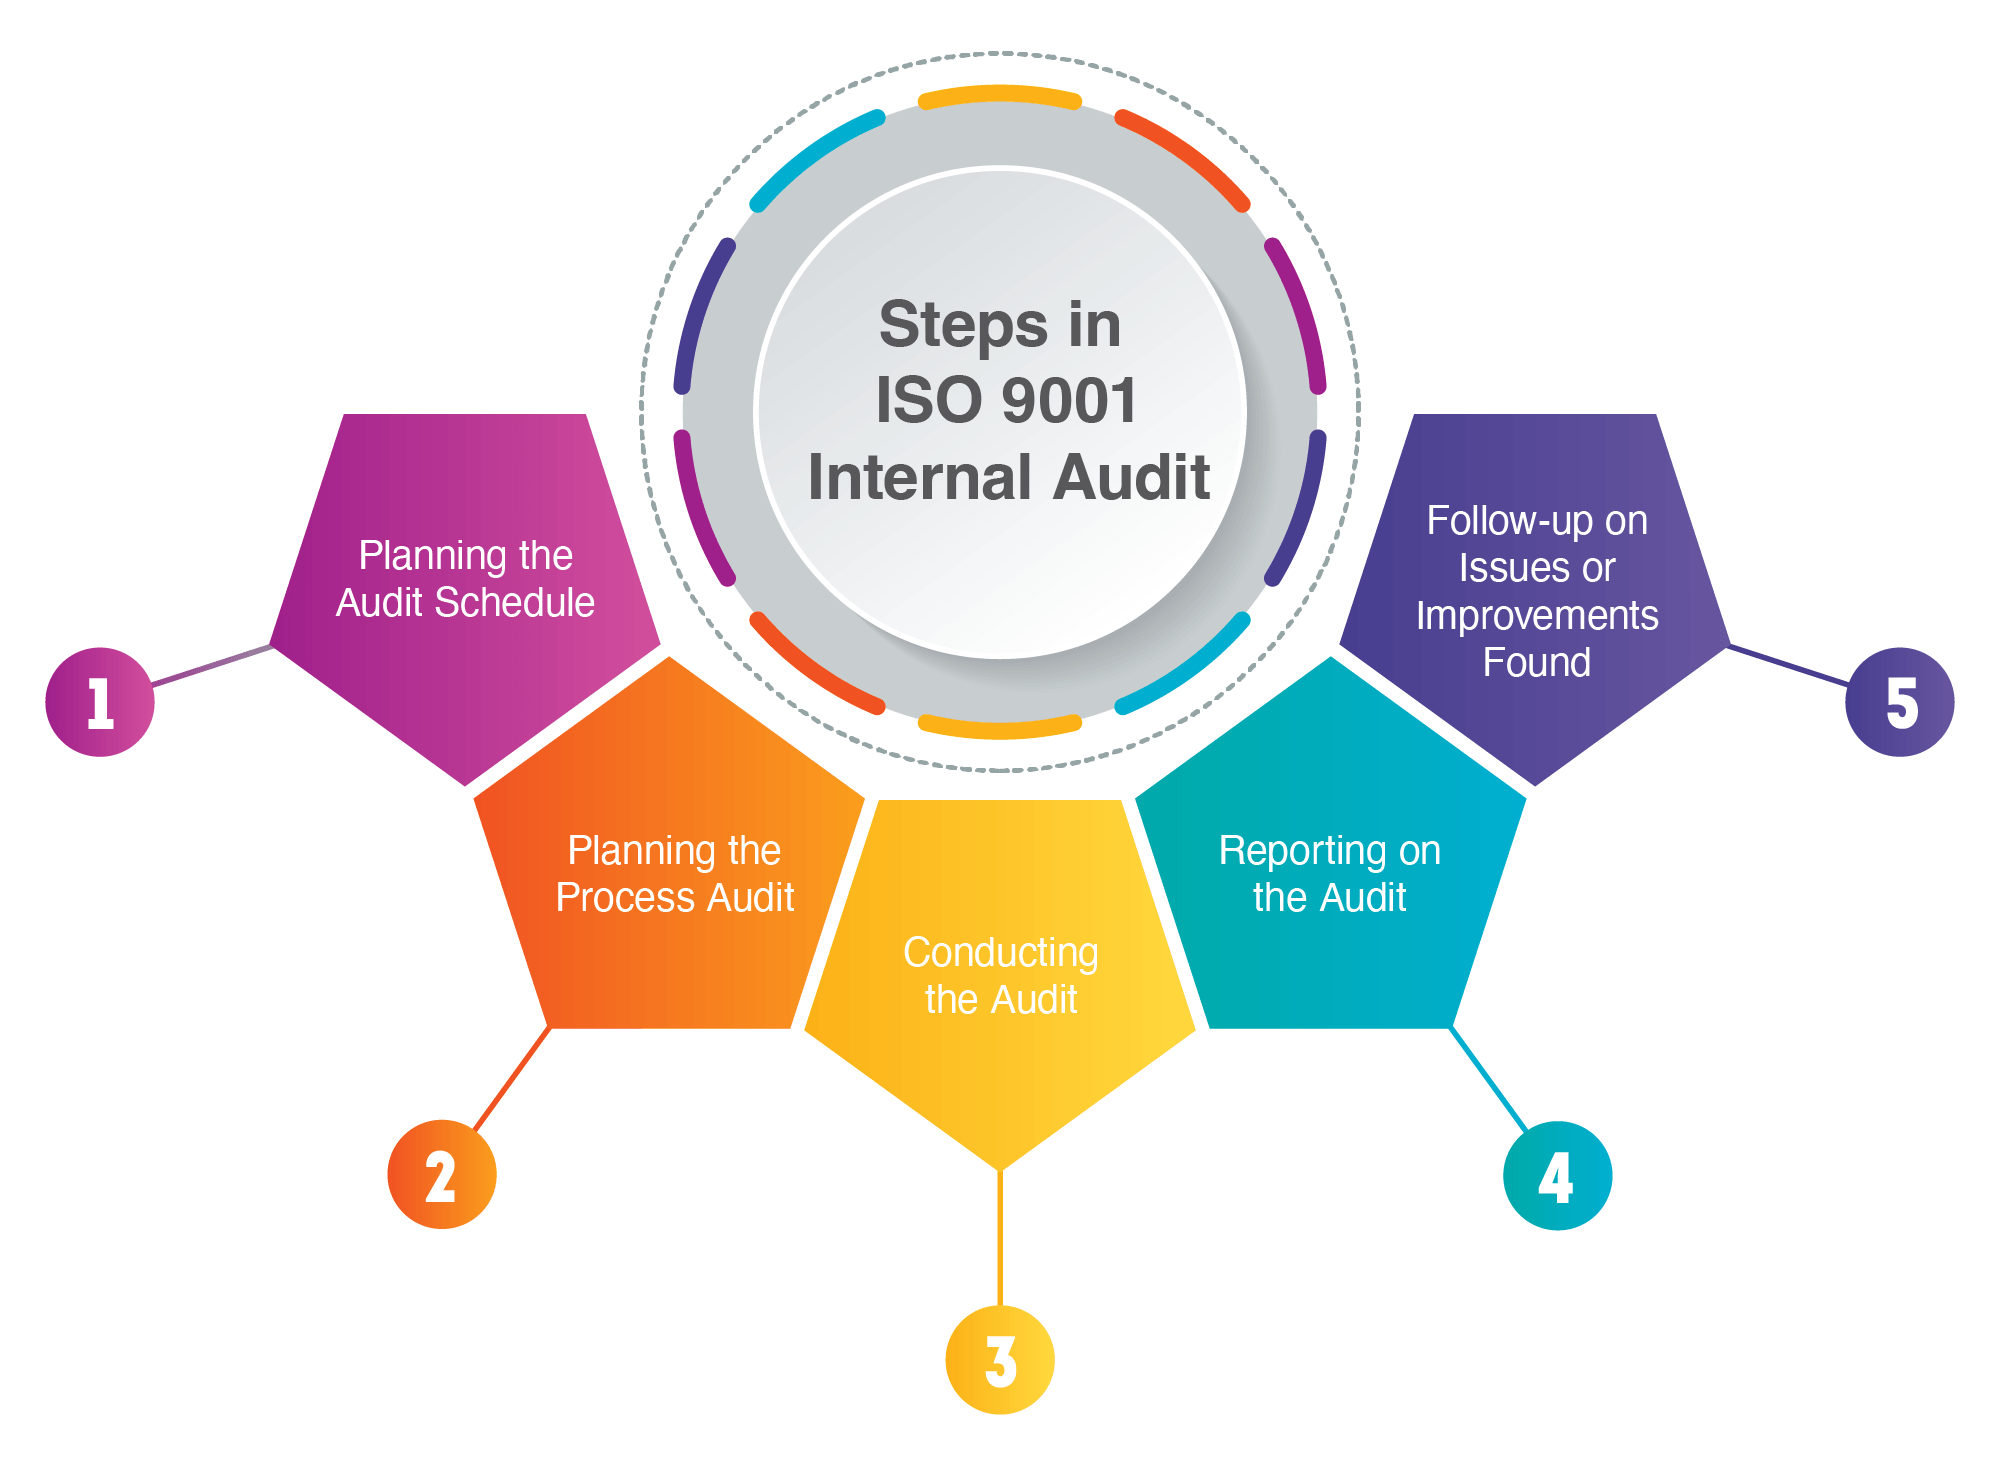 Iso 9001 Internal Audit Five Main Steps To Make It More Effective